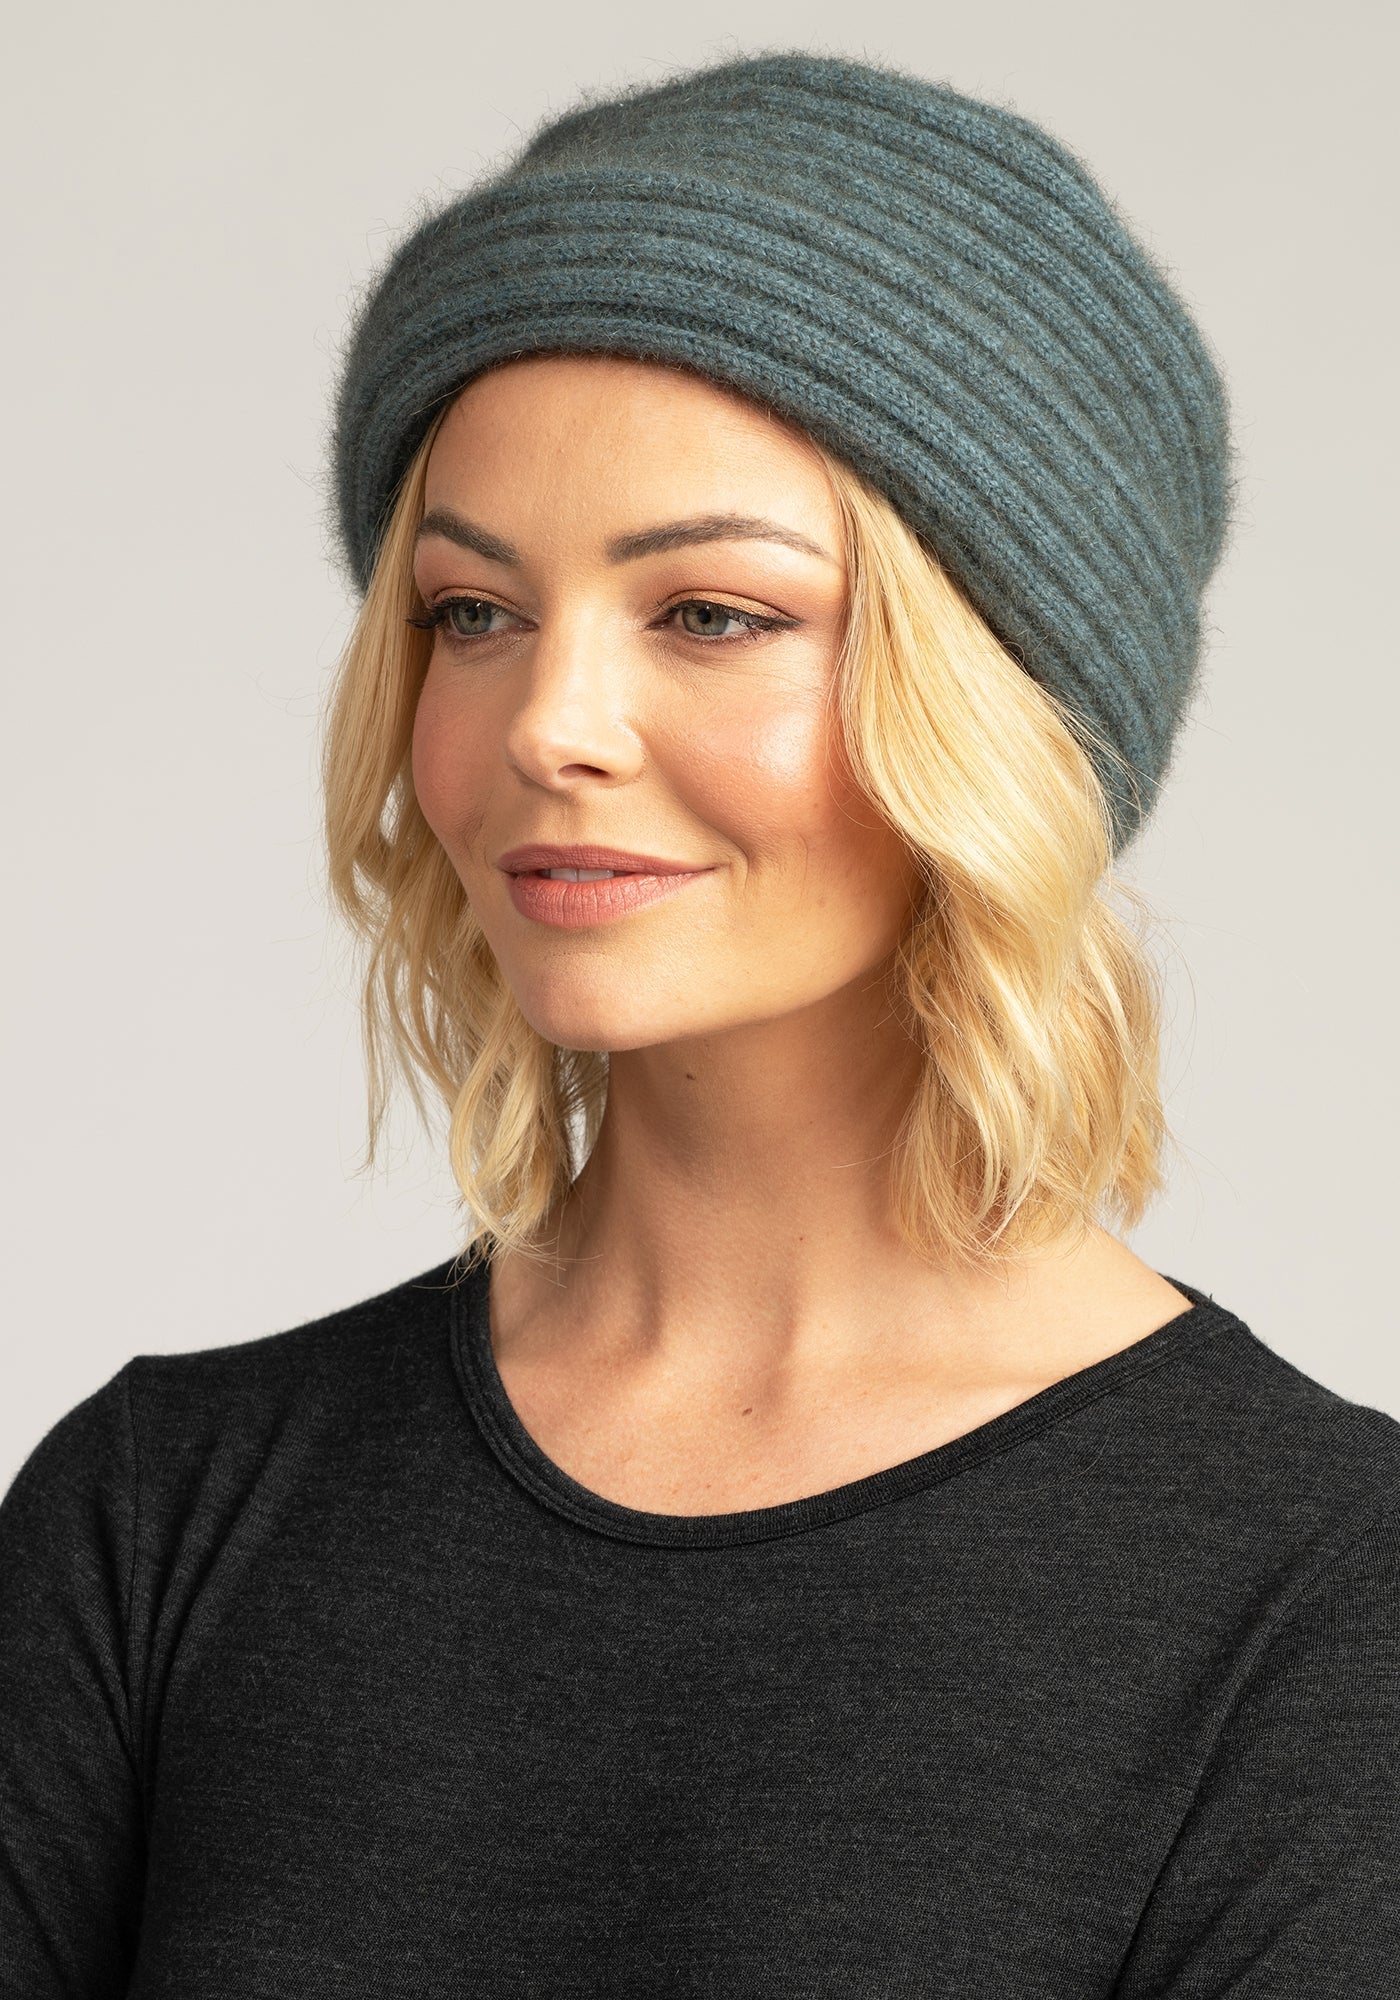 Elevate your winter look with our Grey Merino Knit Hat. Soft, stylish, and snug. Buy yours today!